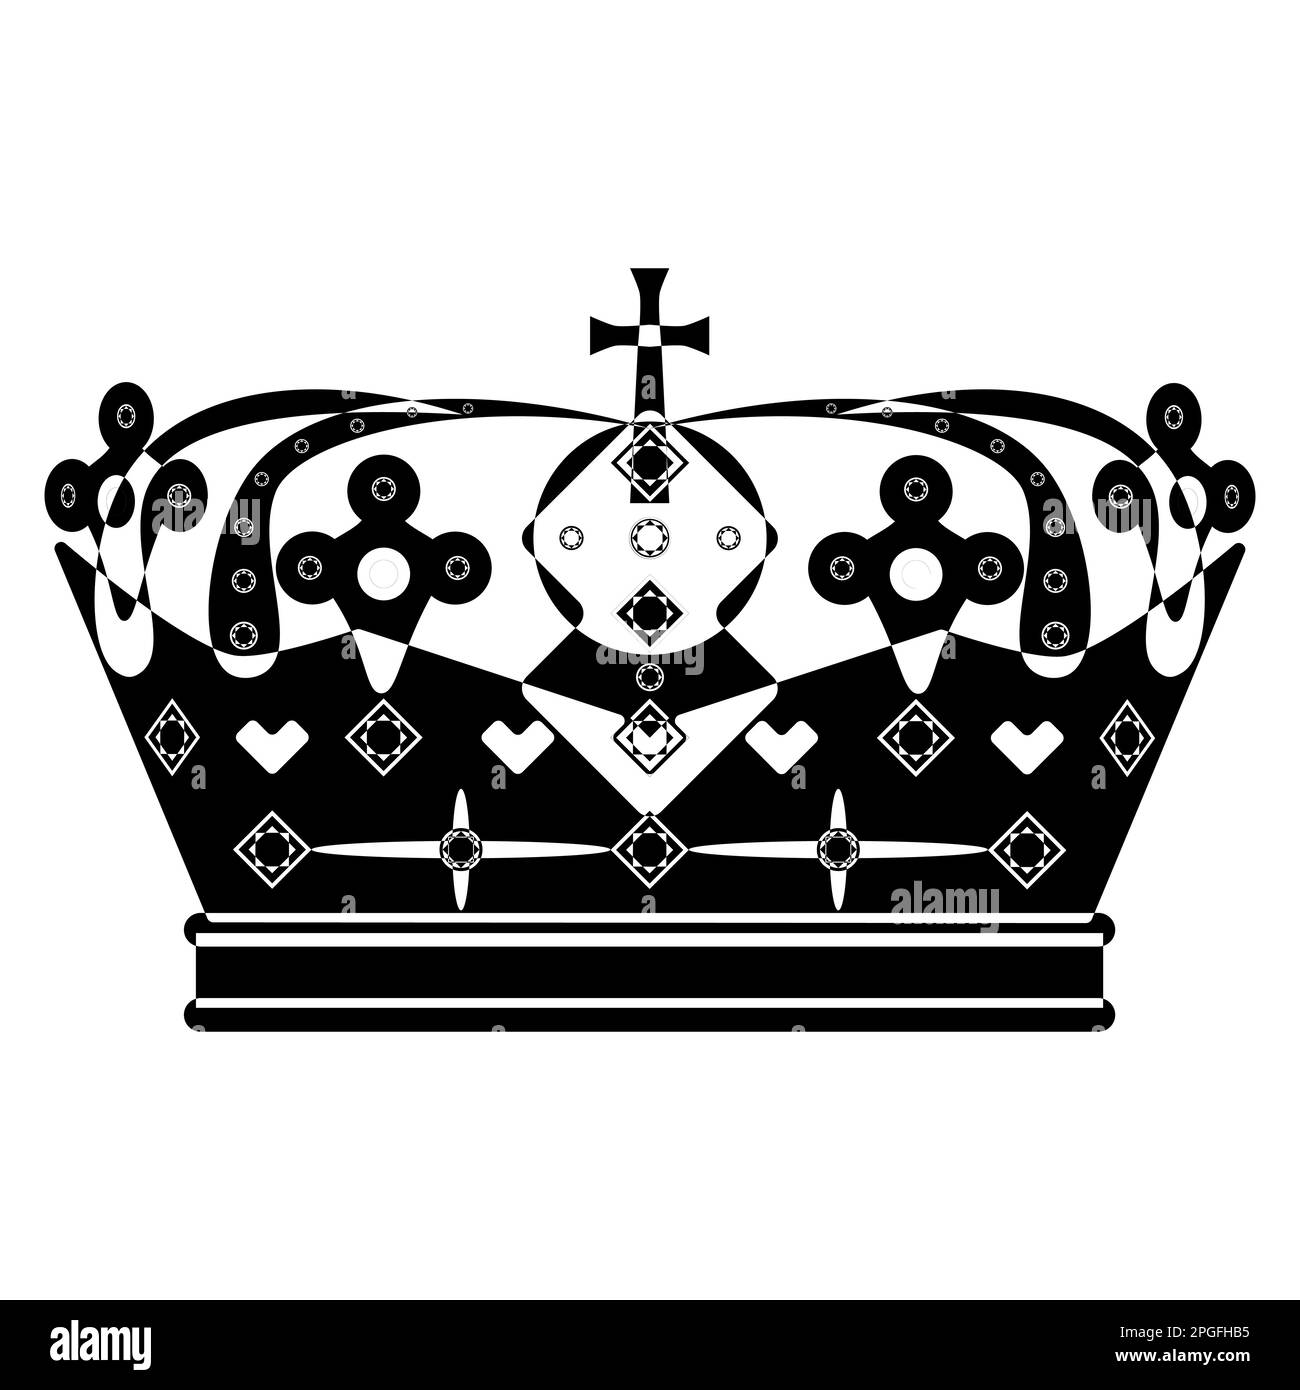 Crown in outline style. Classic royal symbol. Lineart vector illustration isolated on white background. Stock Vector